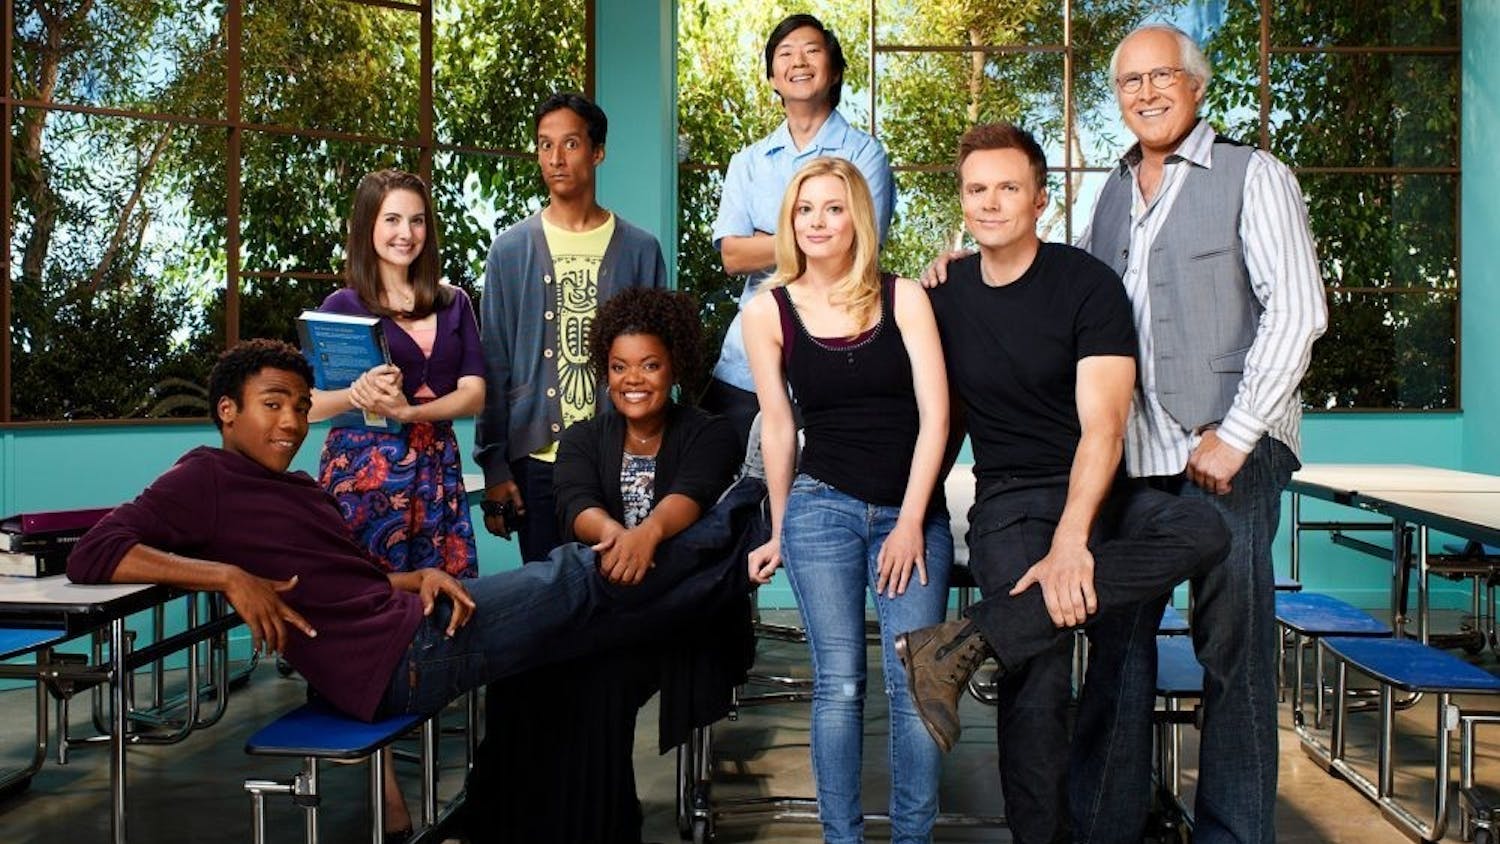 The characters of “Community” grow from study group to family in their comedic adventures.